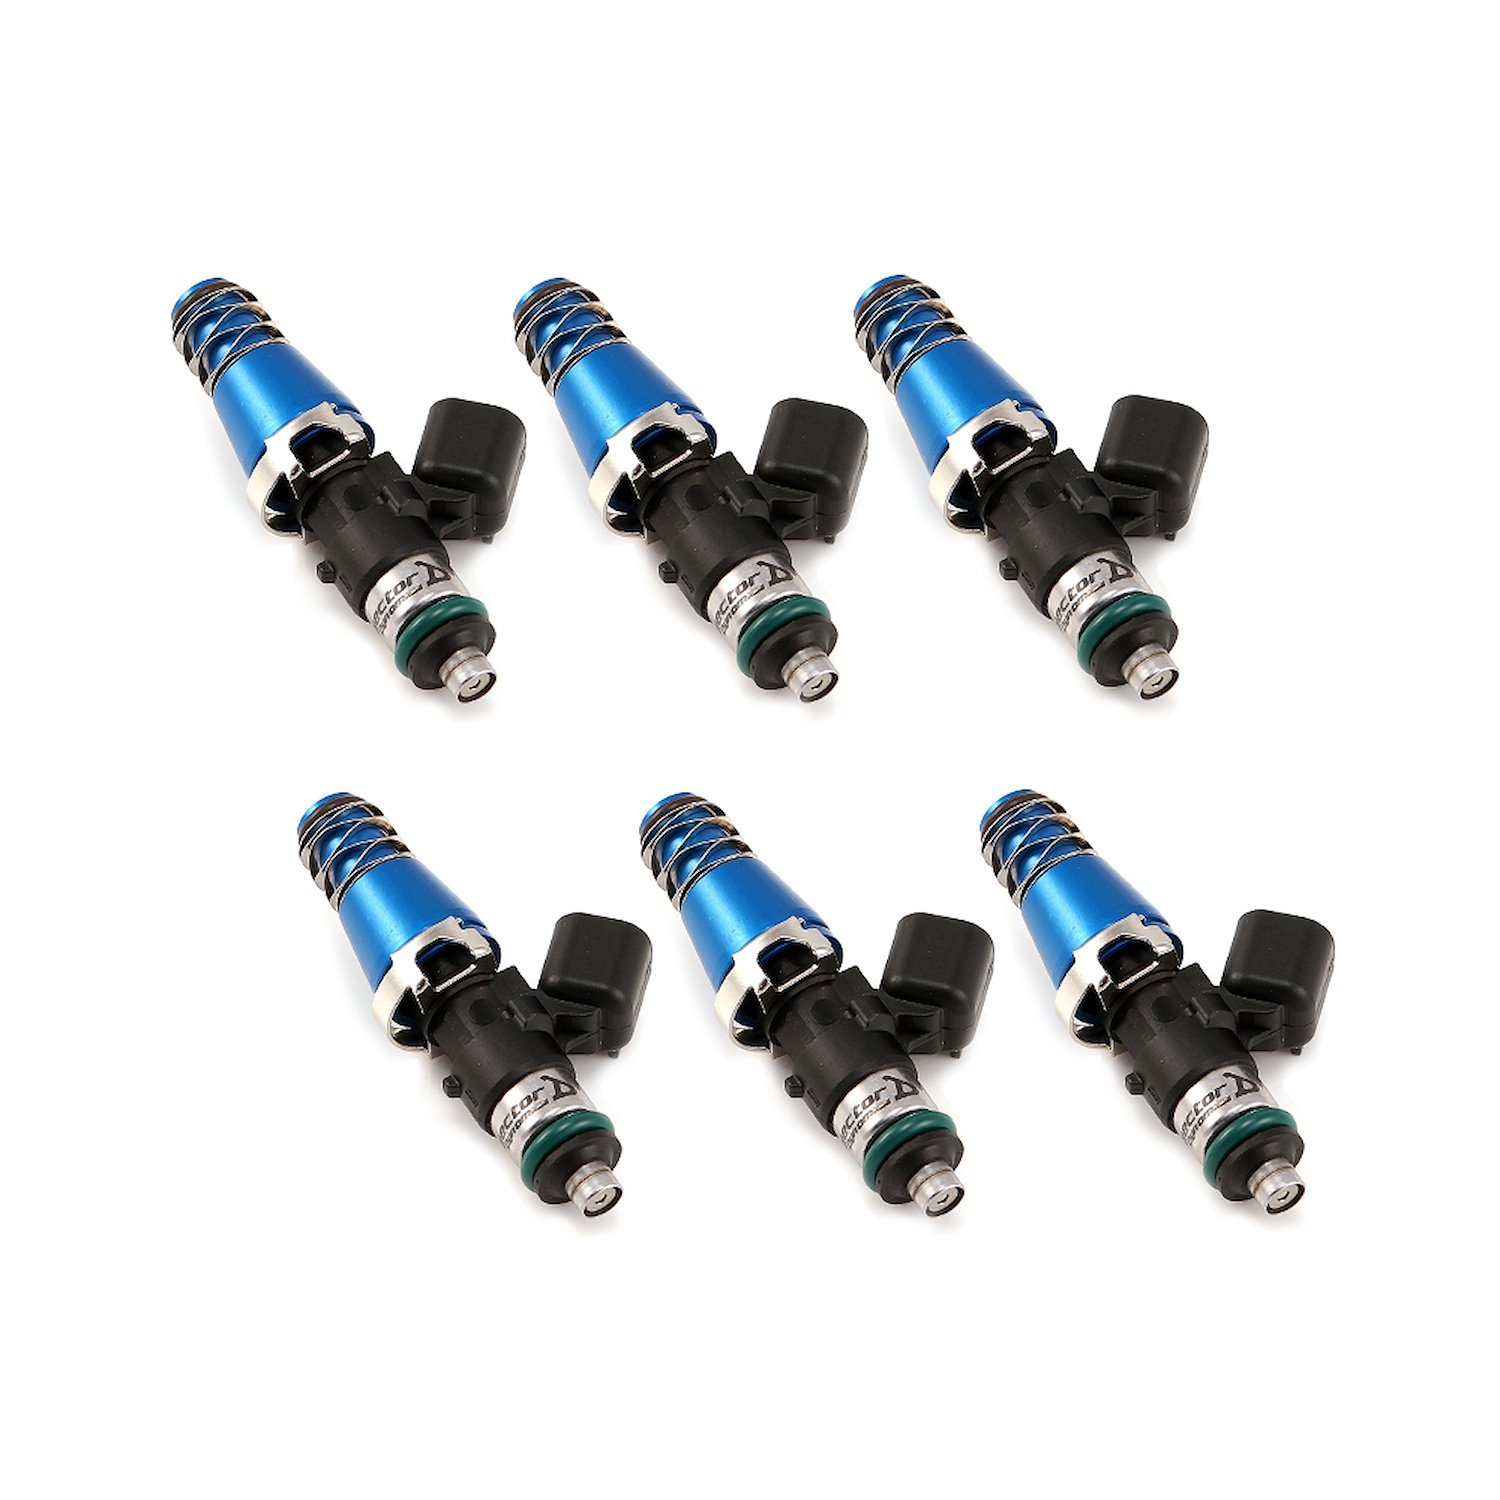 1700.60.11.14.6 1700cc Fuel Injector Set, 60 mm Length, 11 mm Blue Top, 14 mm Lower O-Ring